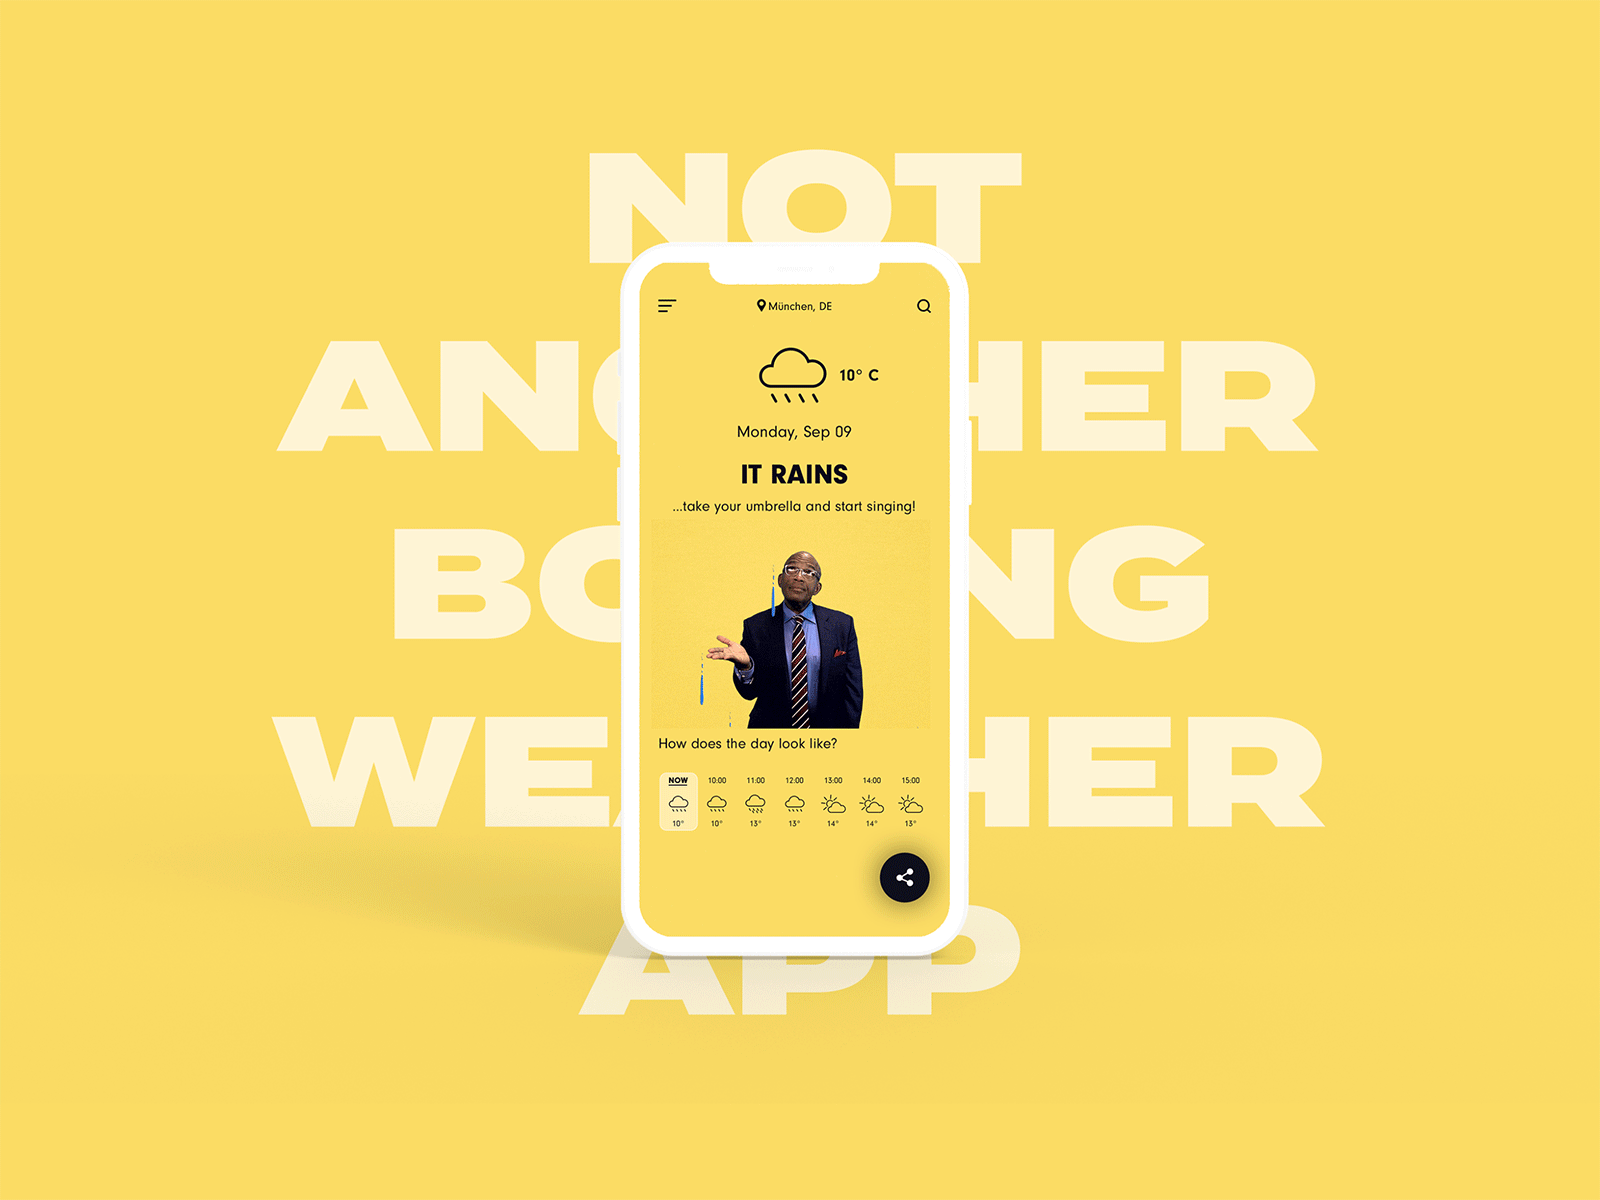 Not another boring weather app!